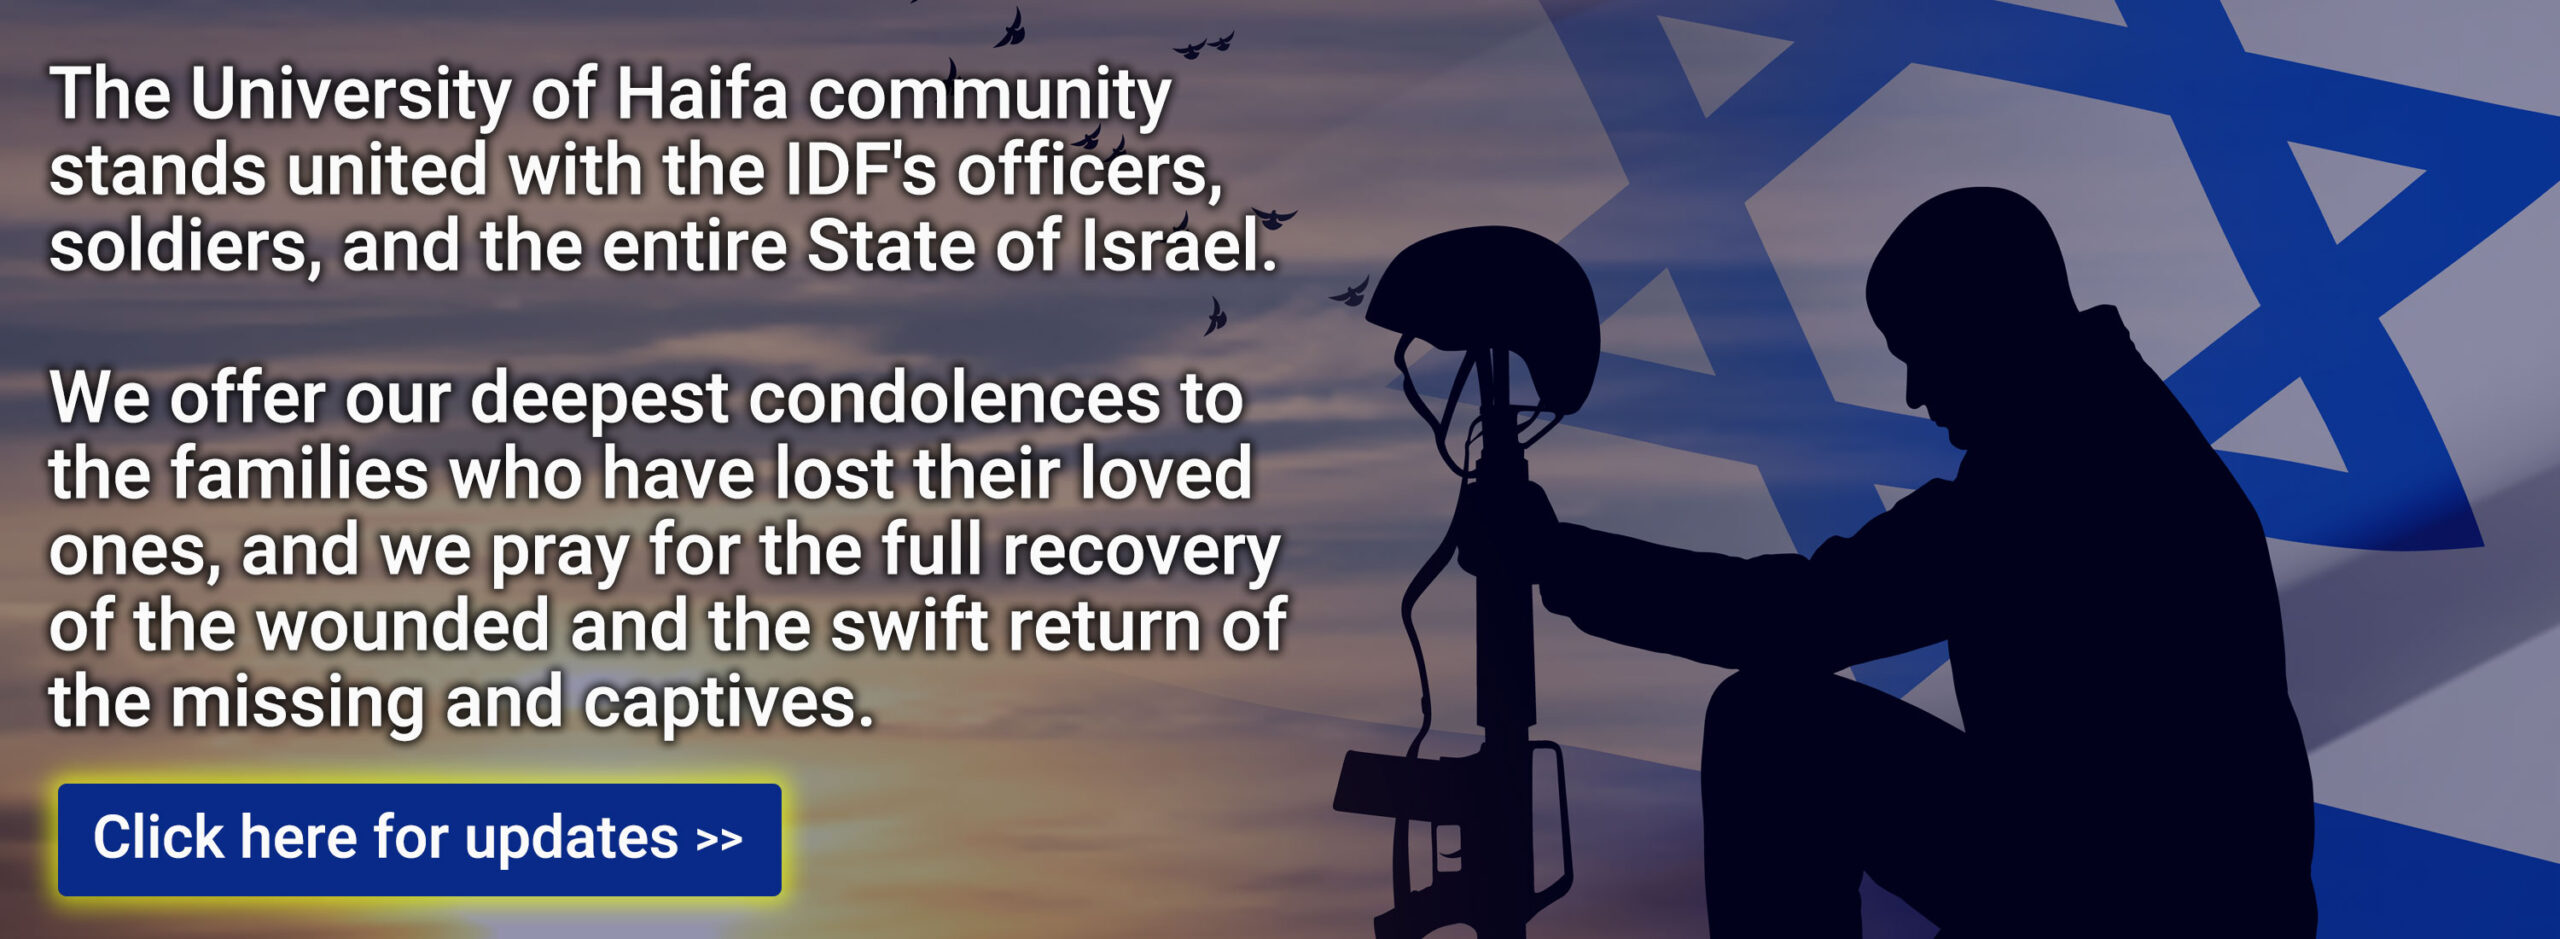 The University of Haifa community stands united with the IDF's officers, soldiers, and the entire State of Israel. We offer our deepest condolences to the families who have lost their loved ones, and we pray for the full recovery of the wounded and the swift return of the missing and captives. Click here for updates